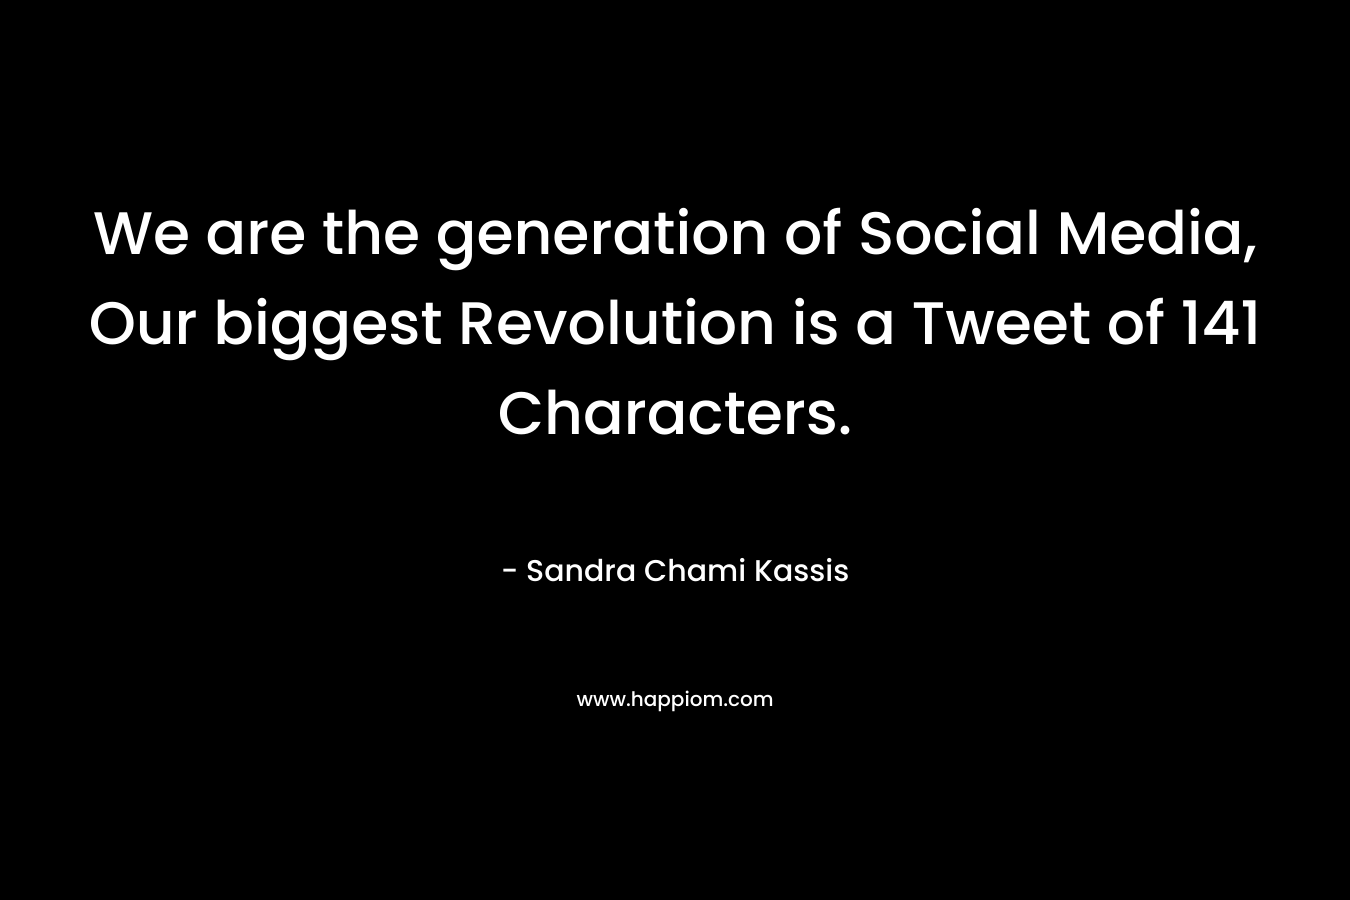 We are the generation of Social Media, Our biggest Revolution is a Tweet of 141 Characters.